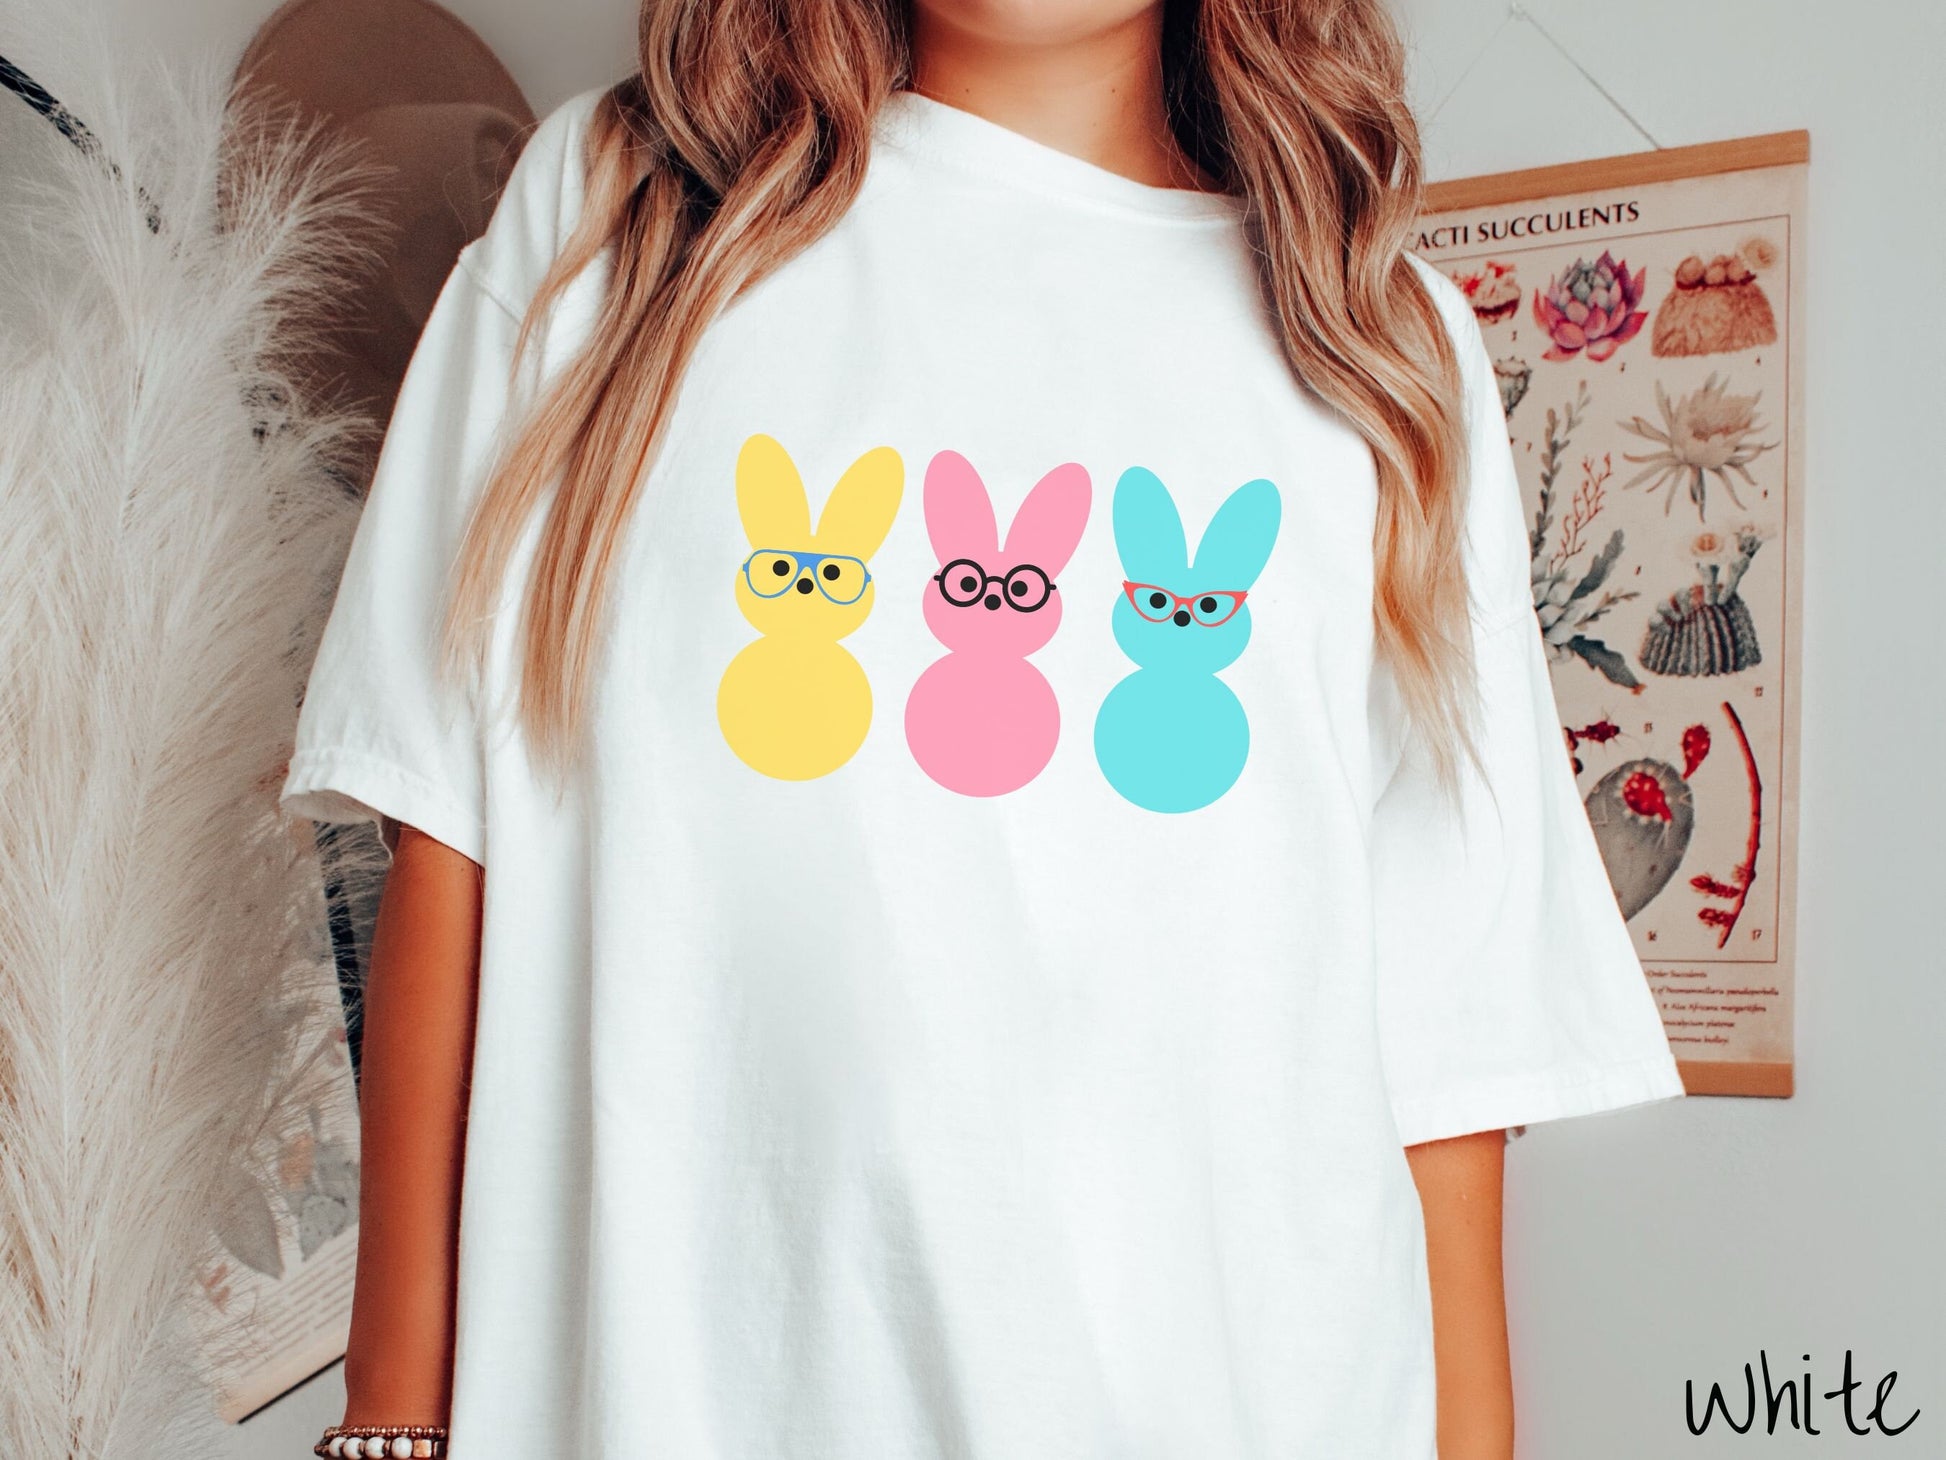 A woman wearing a cute, vintage white colored shirt with three peep-like rabbits on the front. One is yellow and wearing blue glasses, the middle is pink with black glasses, and the one on the right is light blue with red glasses.